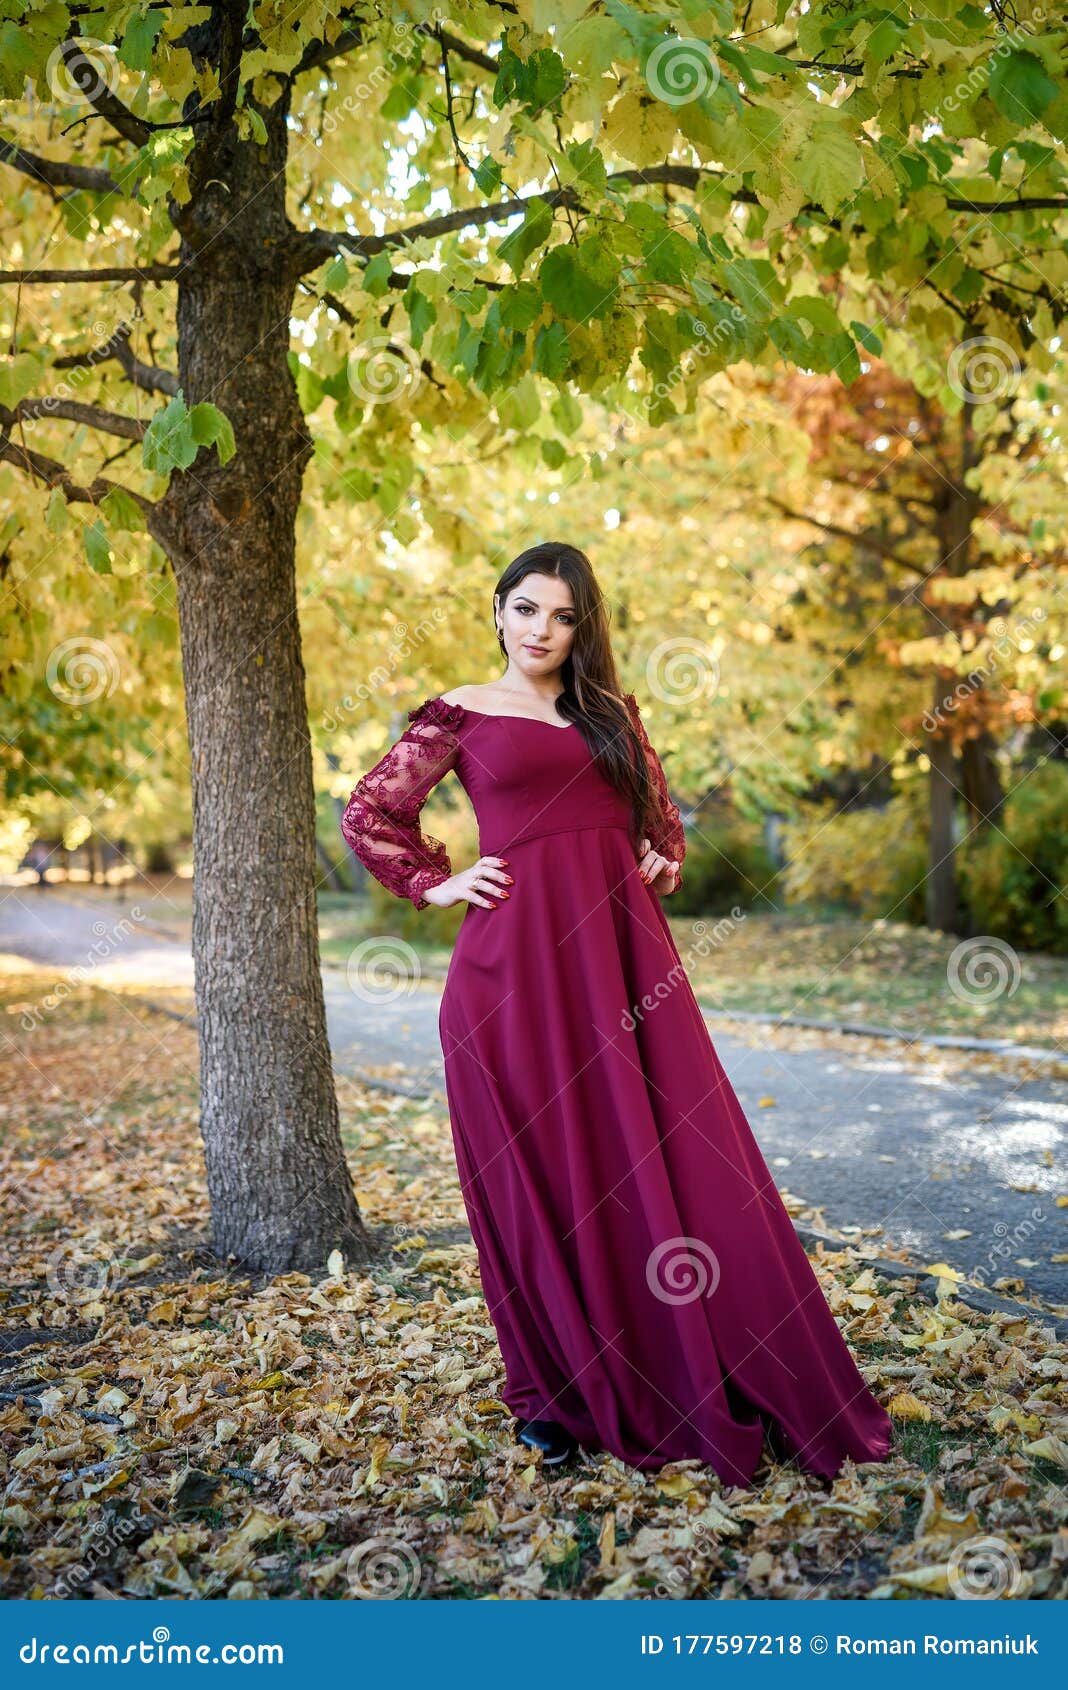 Young Princess in a Beautiful Red Dress in Park. the Background is ...